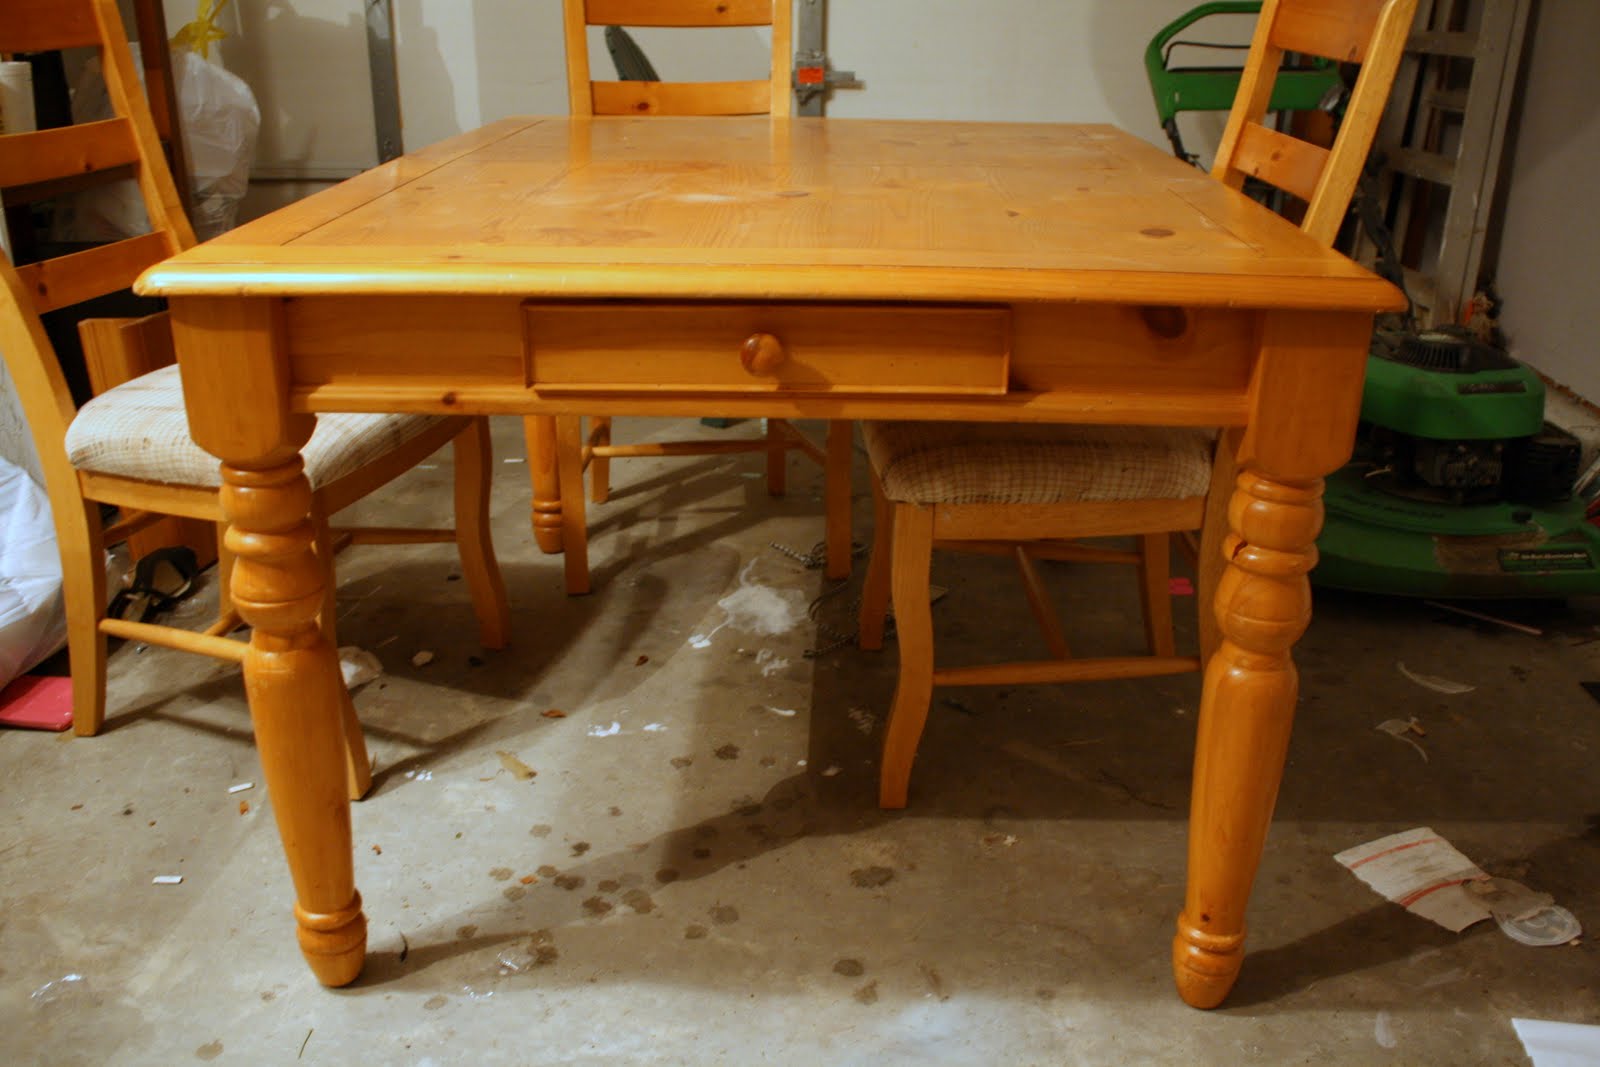 Refinishing The Dining Room Table Shannon Claire - How To Sand And Restain An Oak Table